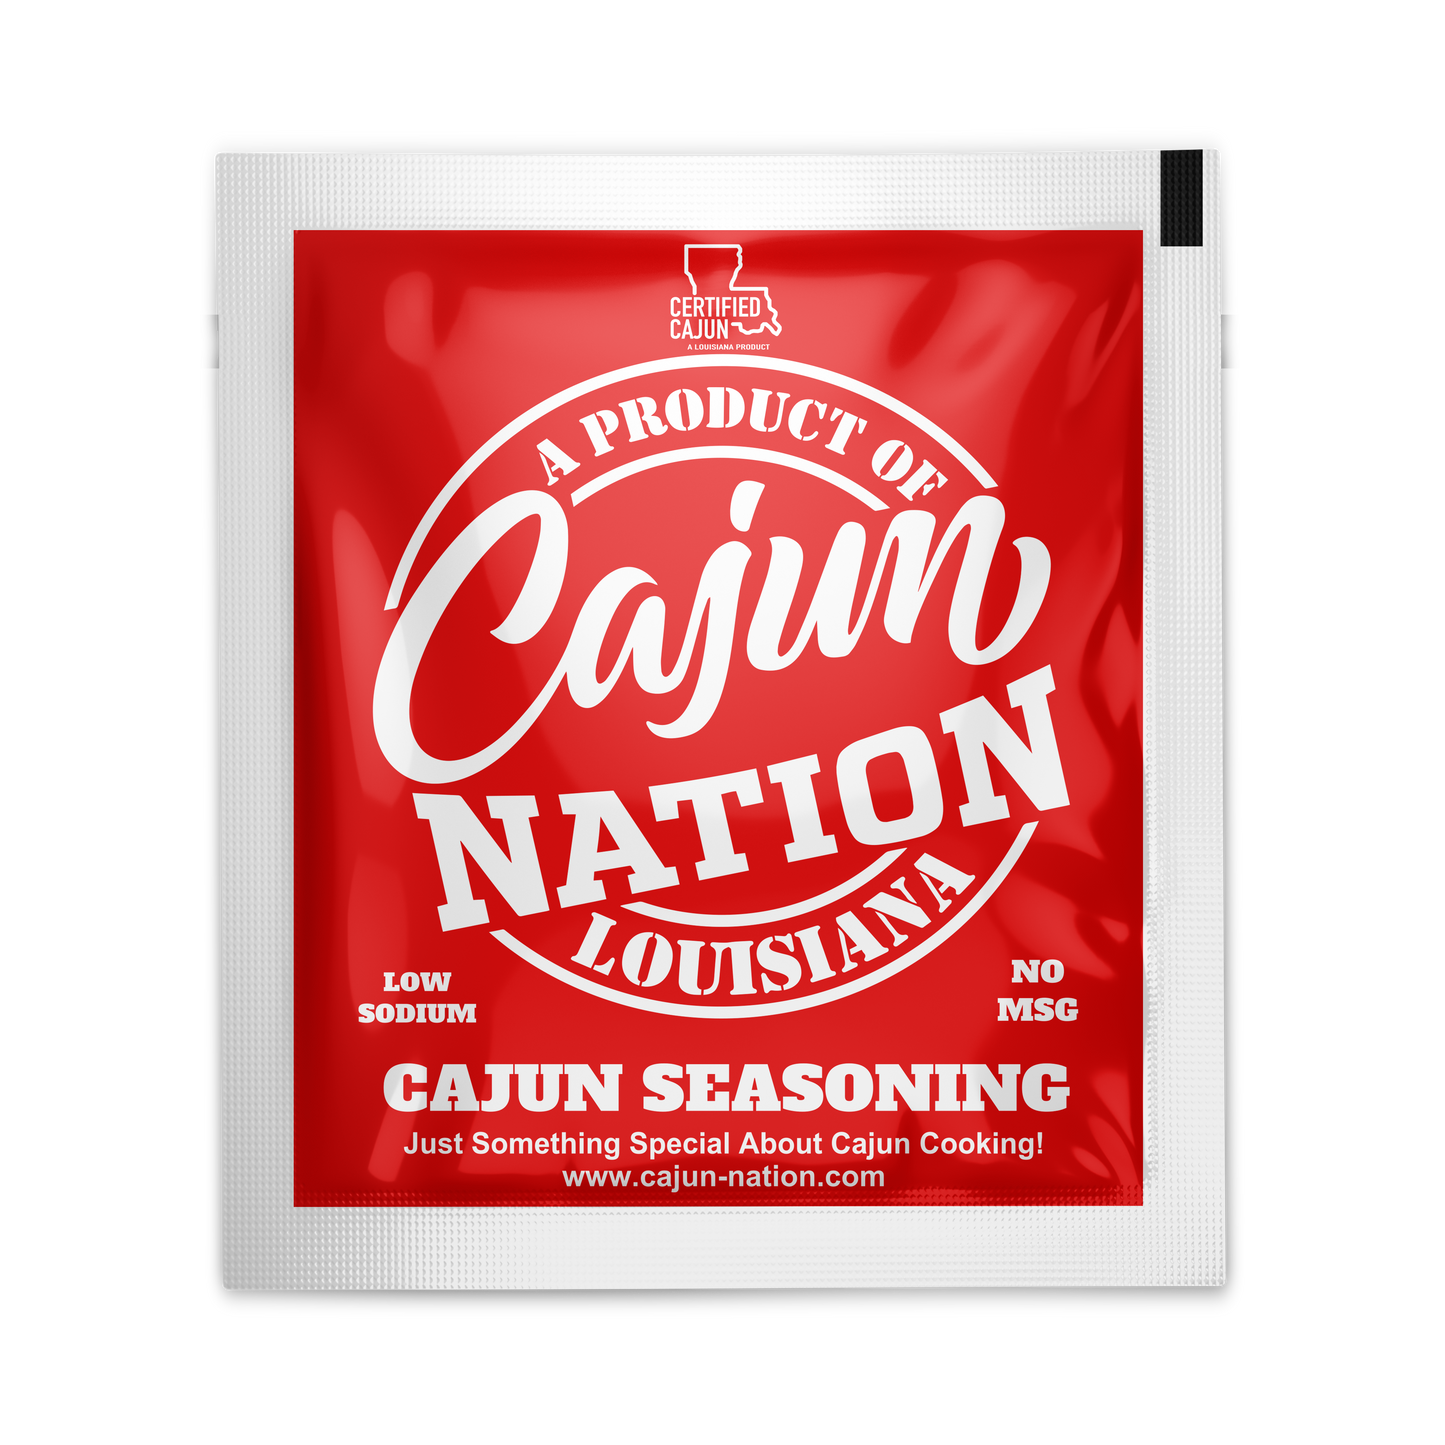 Cajun Nation Seasoning Packets are a Certified Cajun flavorful blend of nature Cajun Spices with No MSG and Gluten Free.  Blended in Cajun Nation along the Cajun Coast in Southwest Louisiana.